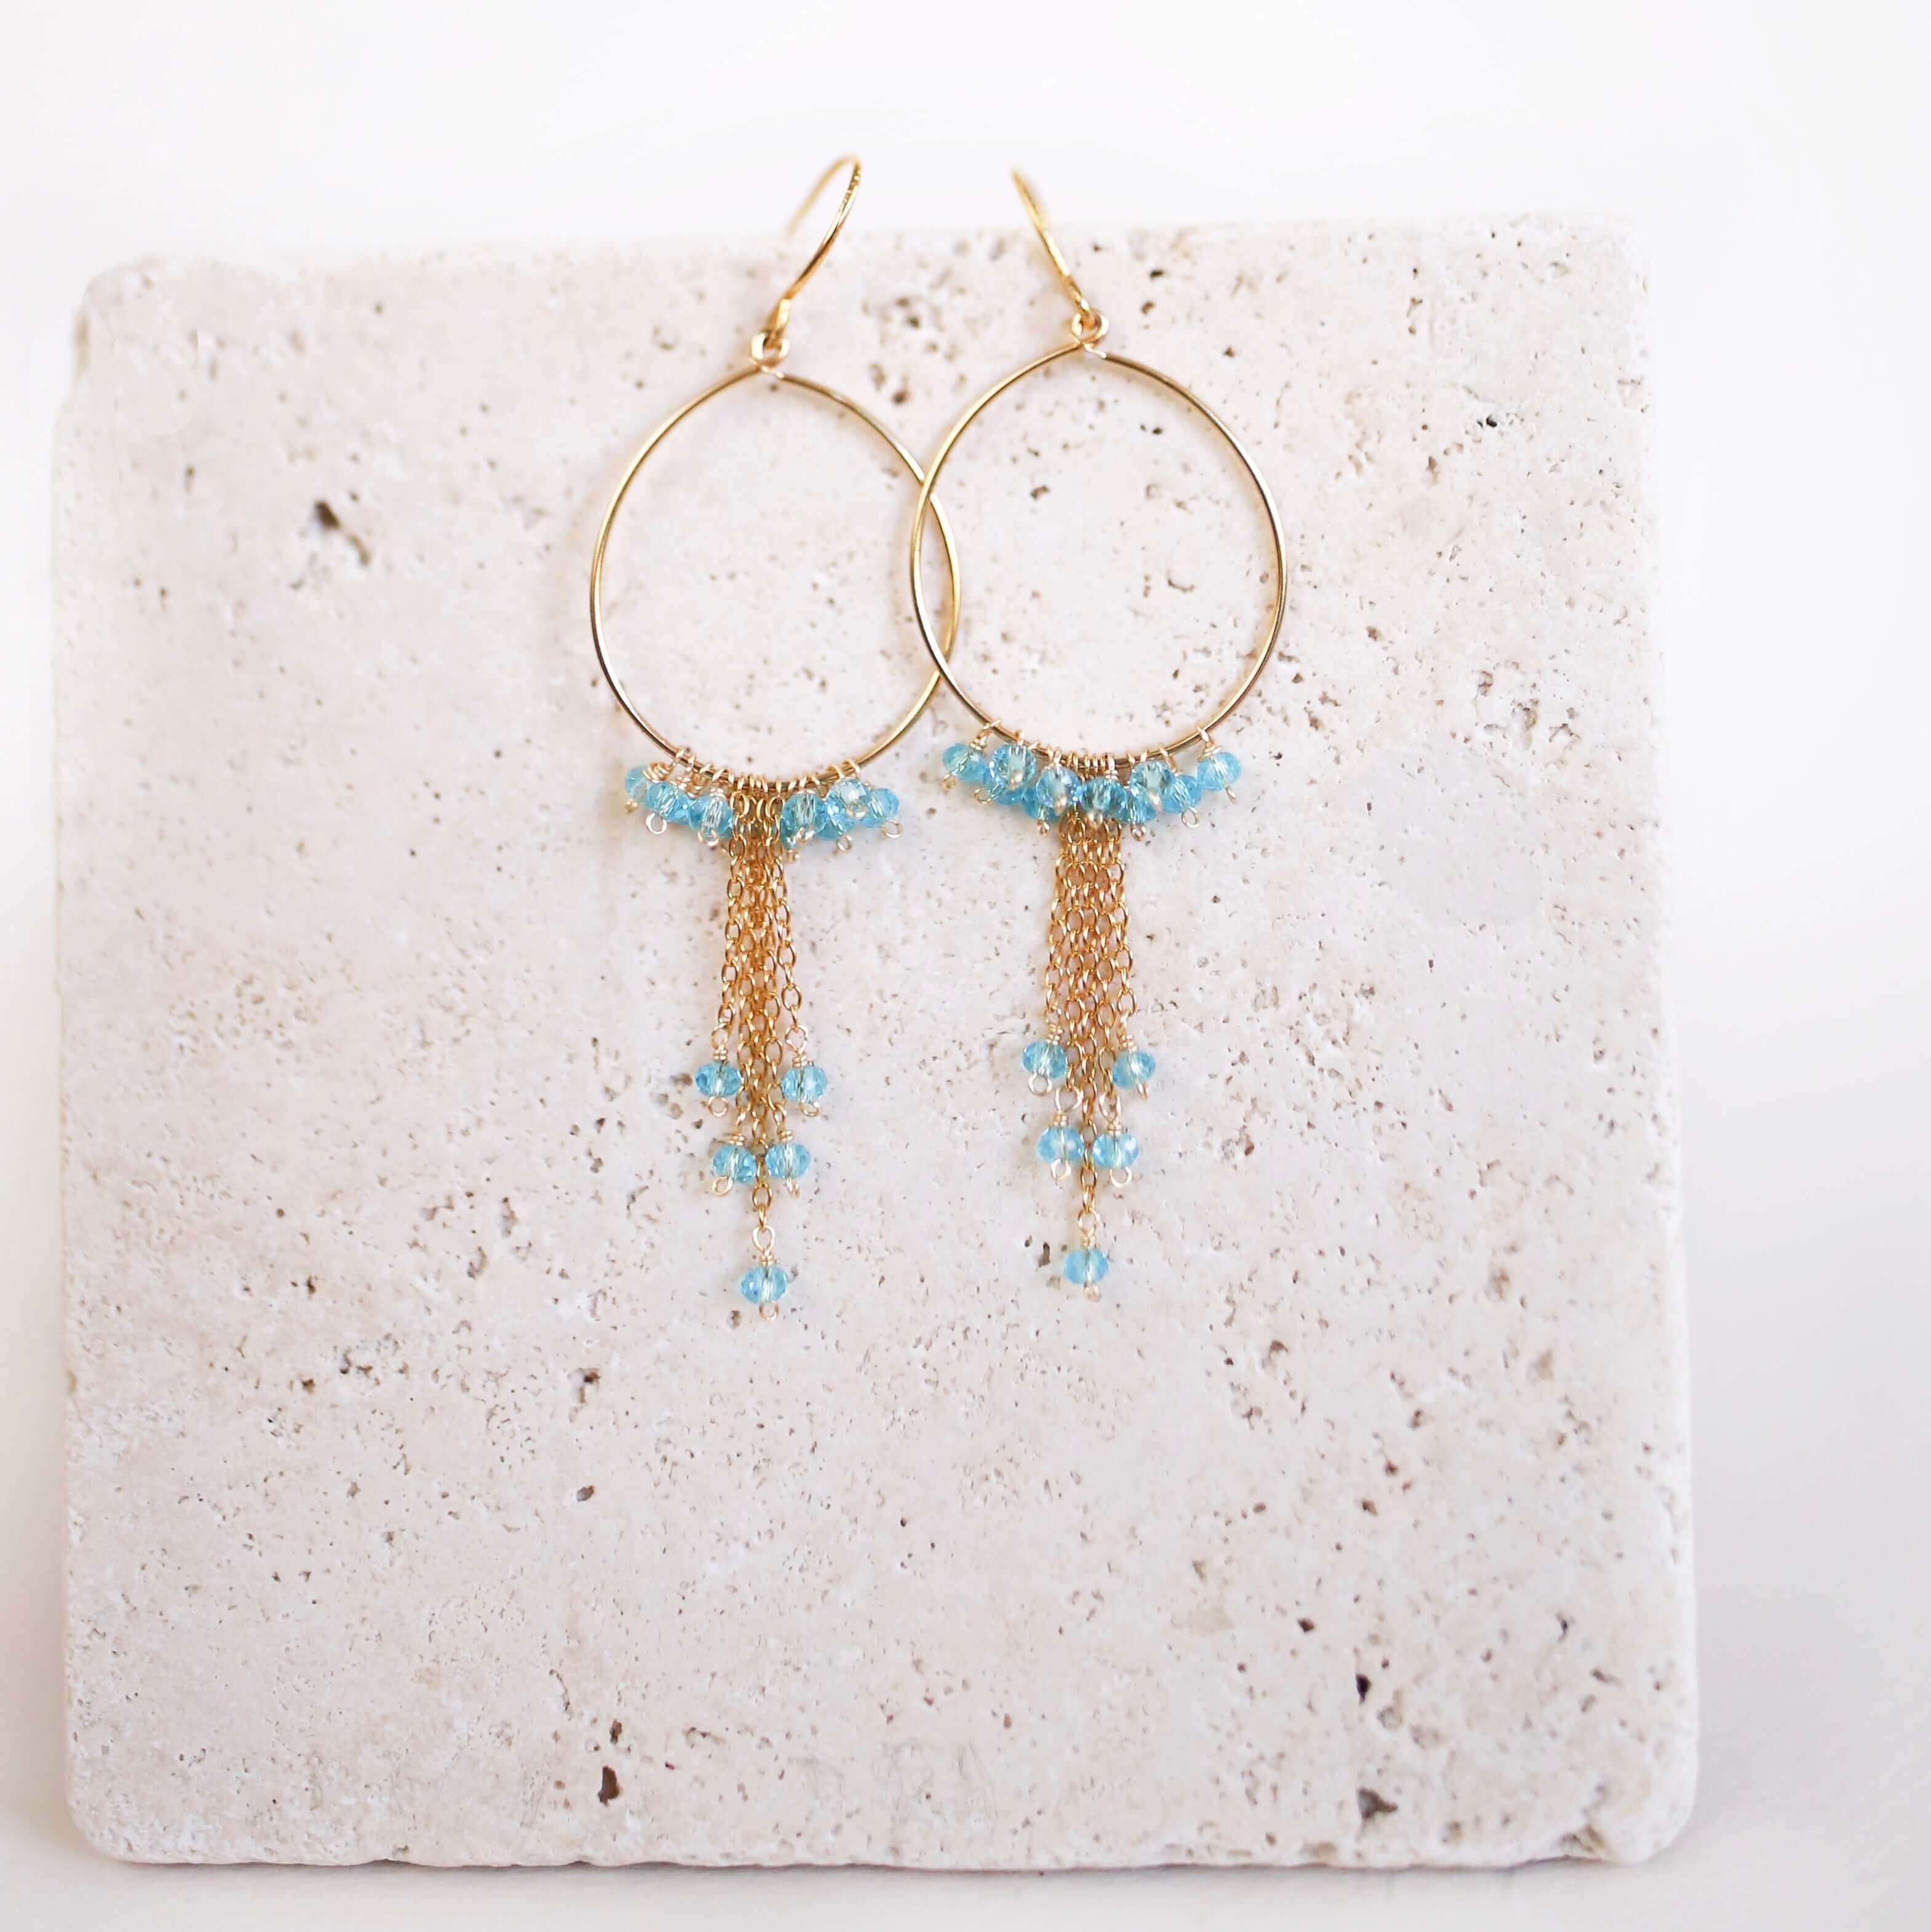 Gold Hoop Earrings with Delicate Chains and Aquamarine Stones